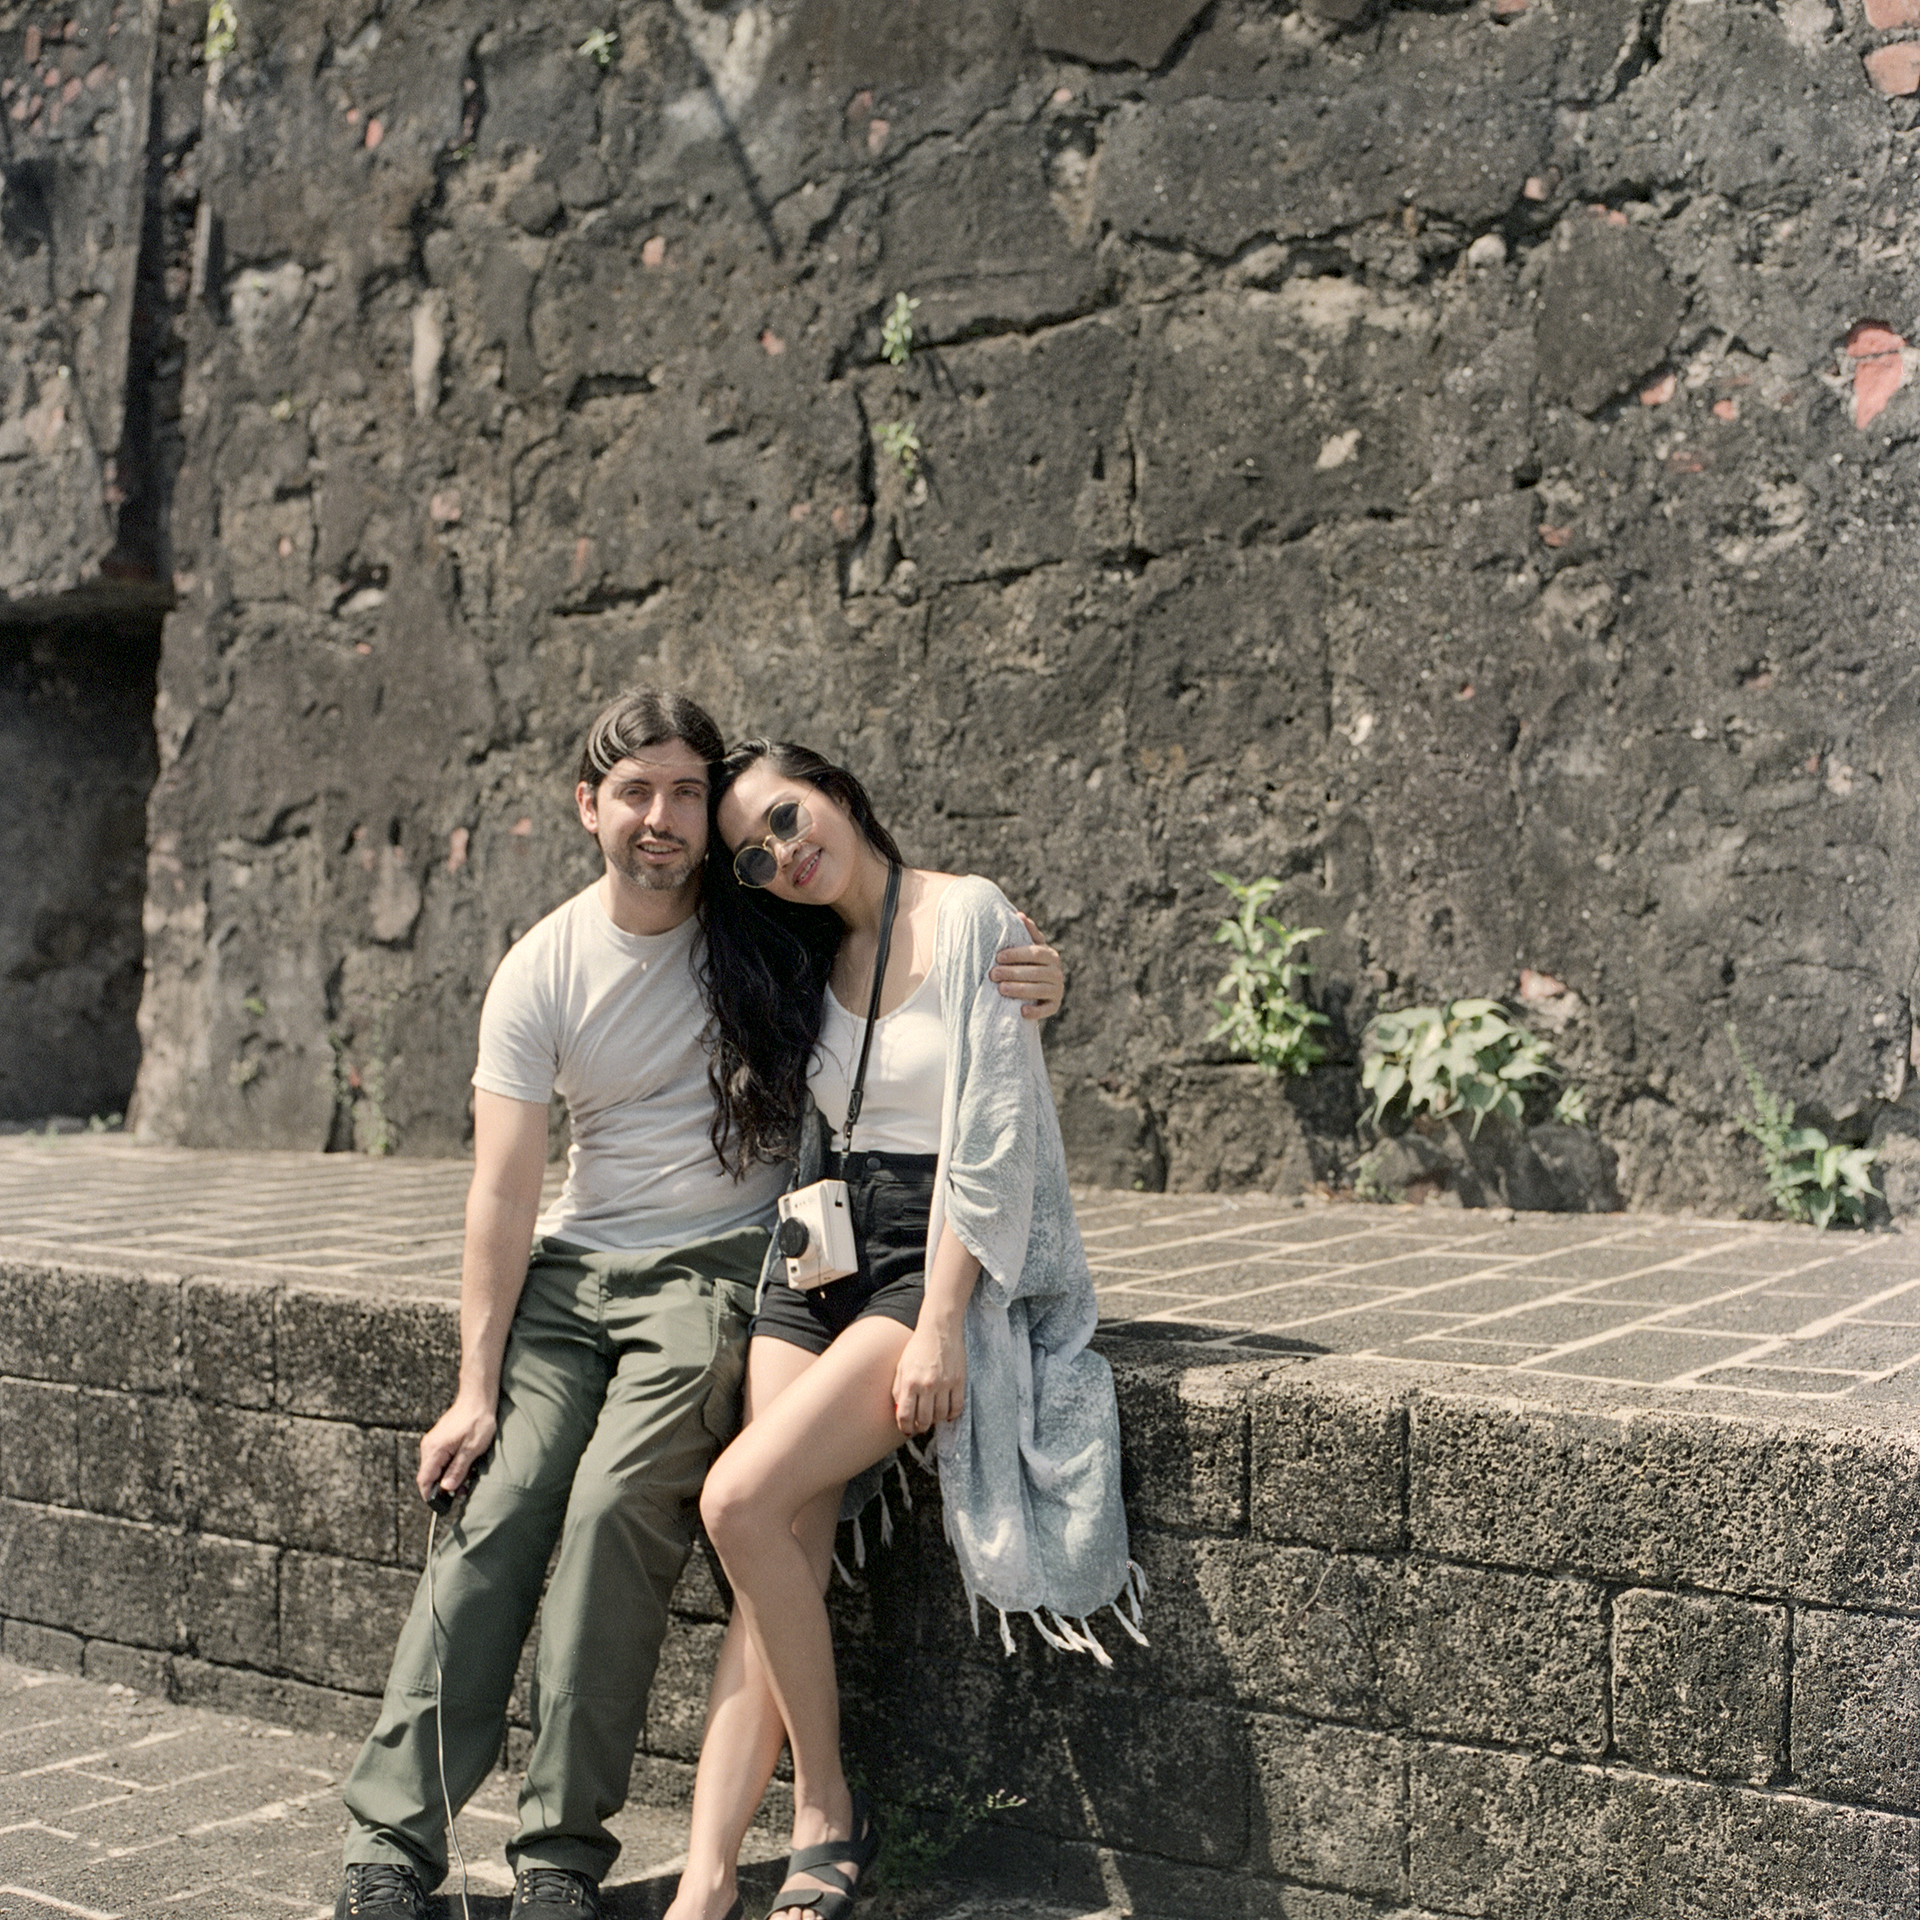 Zab and I sitting on a ledge near an inner wall at Fort Santiago